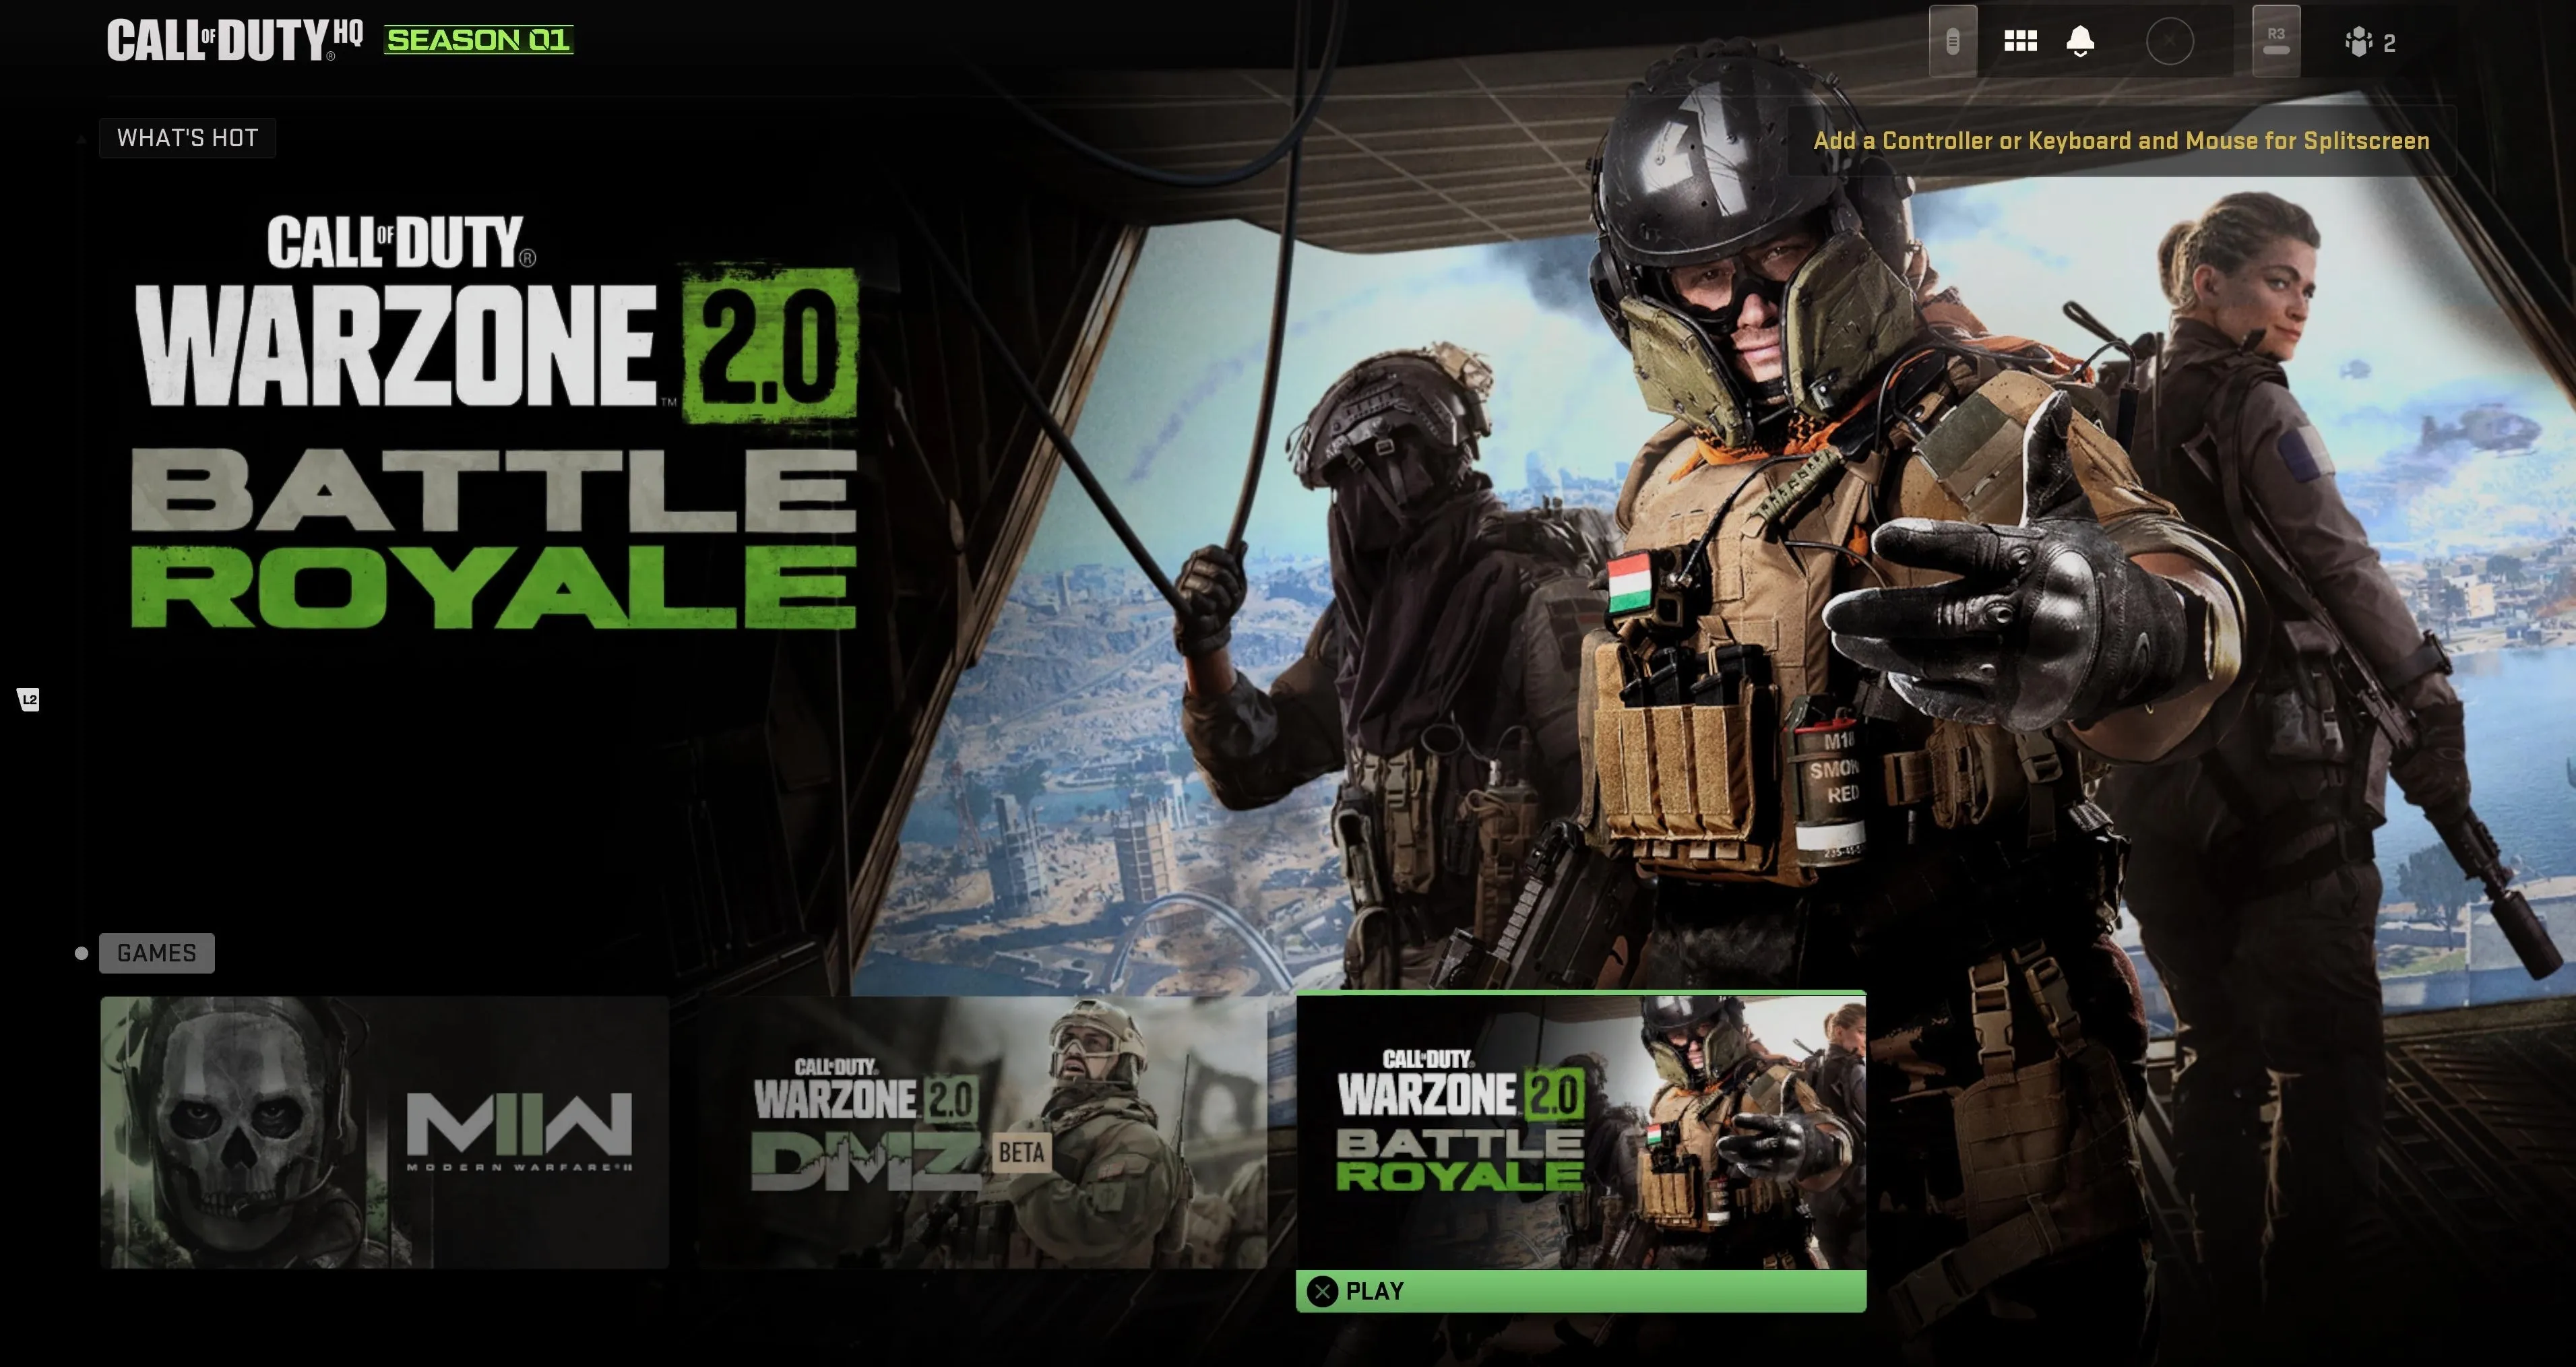 How to download Call of Duty MODERN WARFARE 2/ Warzone 2.0 for FREE.